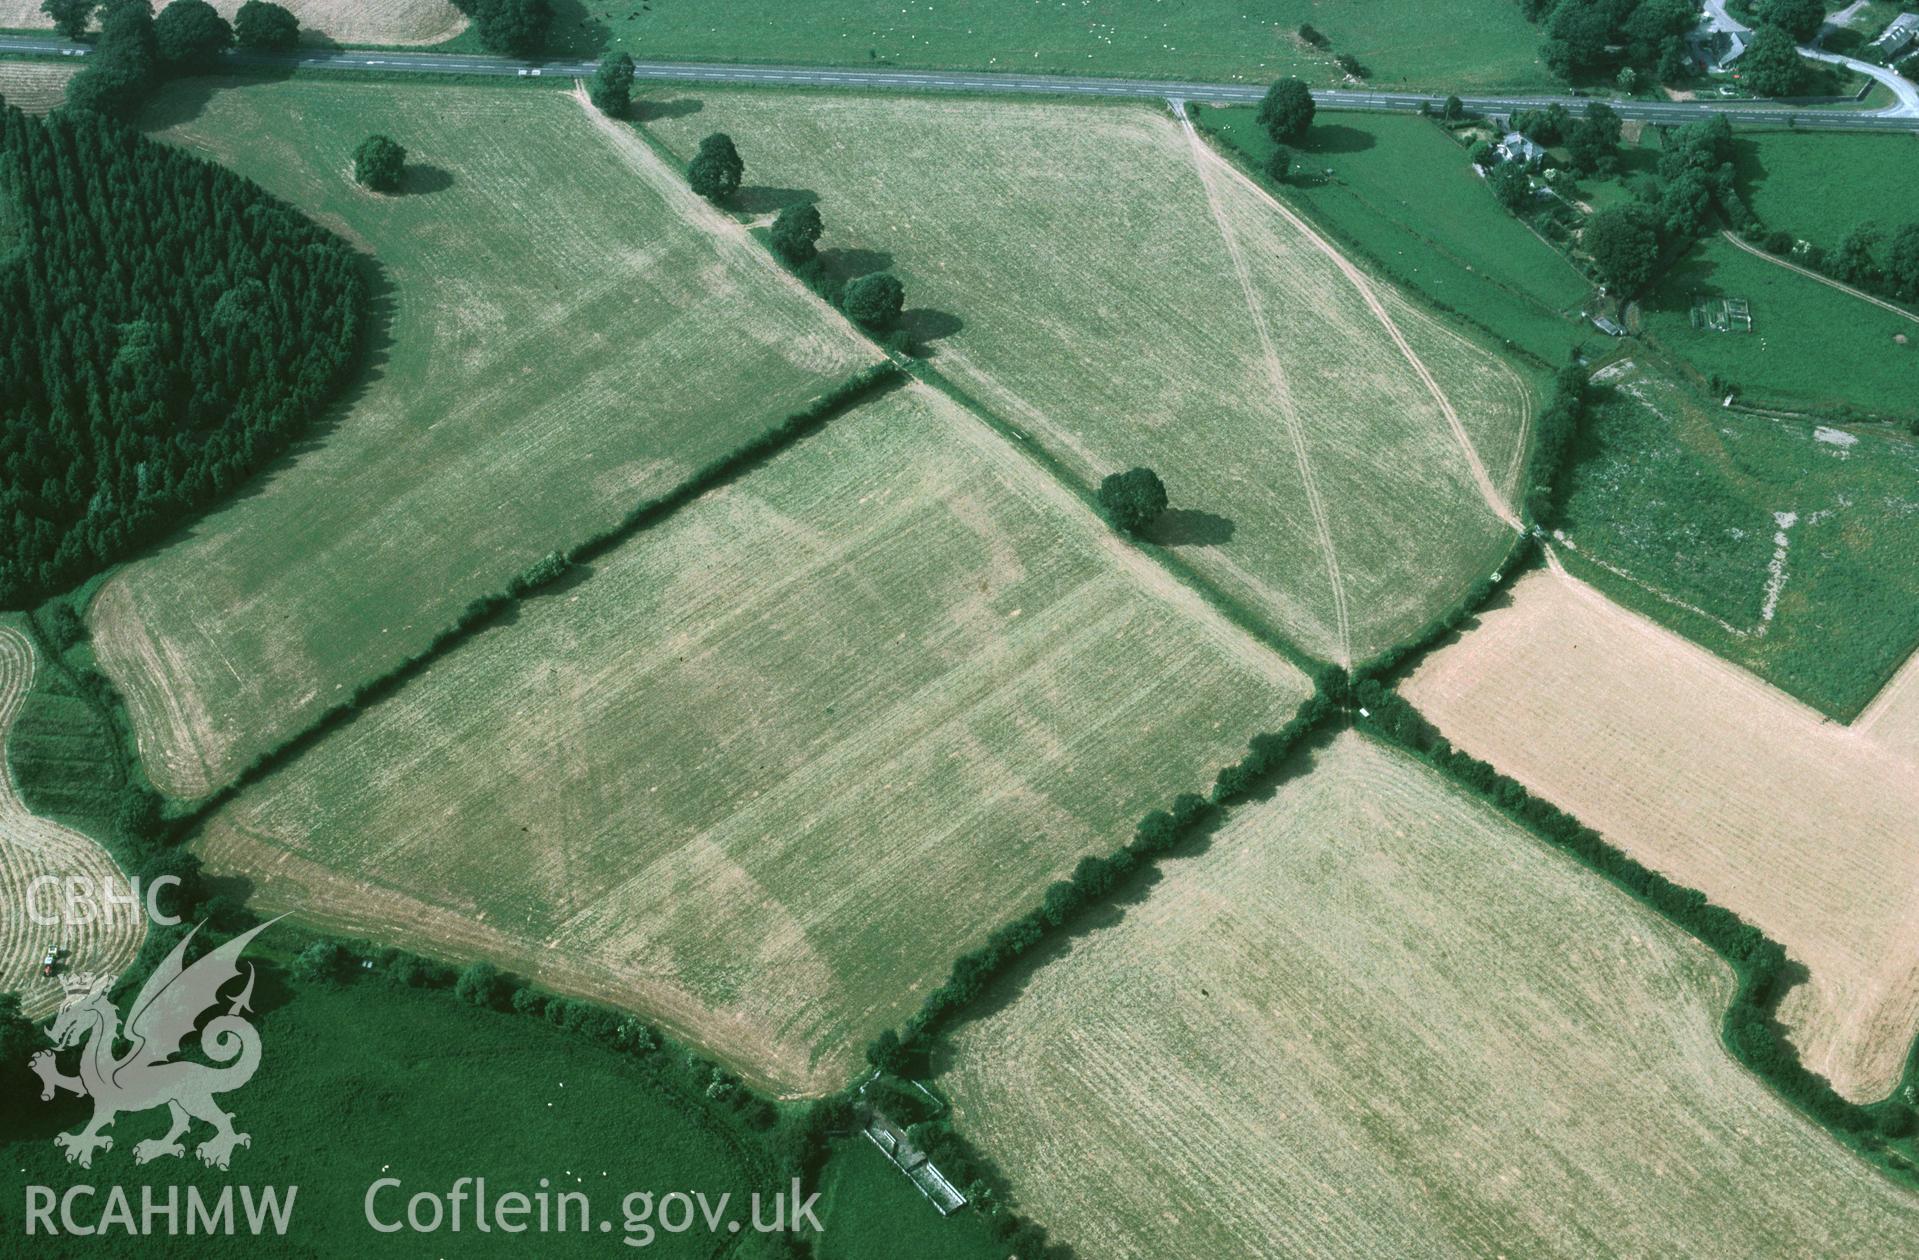 Slide of RCAHMW colour oblique aerial photograph of Llanfor Roman Forts, taken by C.R. Musson, 22/7/1996.